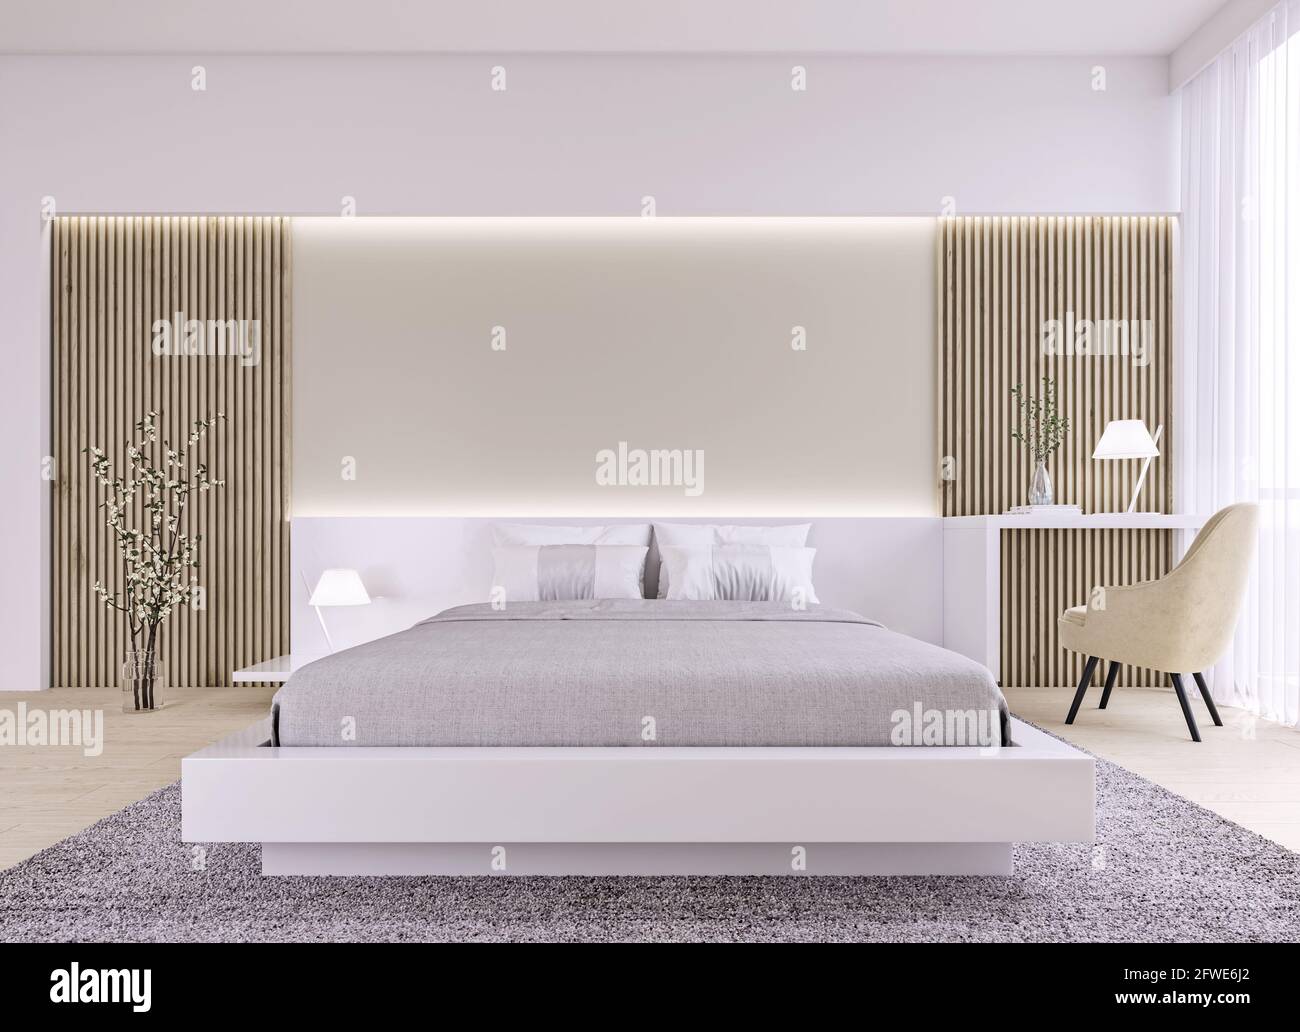 Modern interior design of bright spacious bedroom with wood slat wall and accent lighting, 3d rendering, 3d illustration Stock Photo